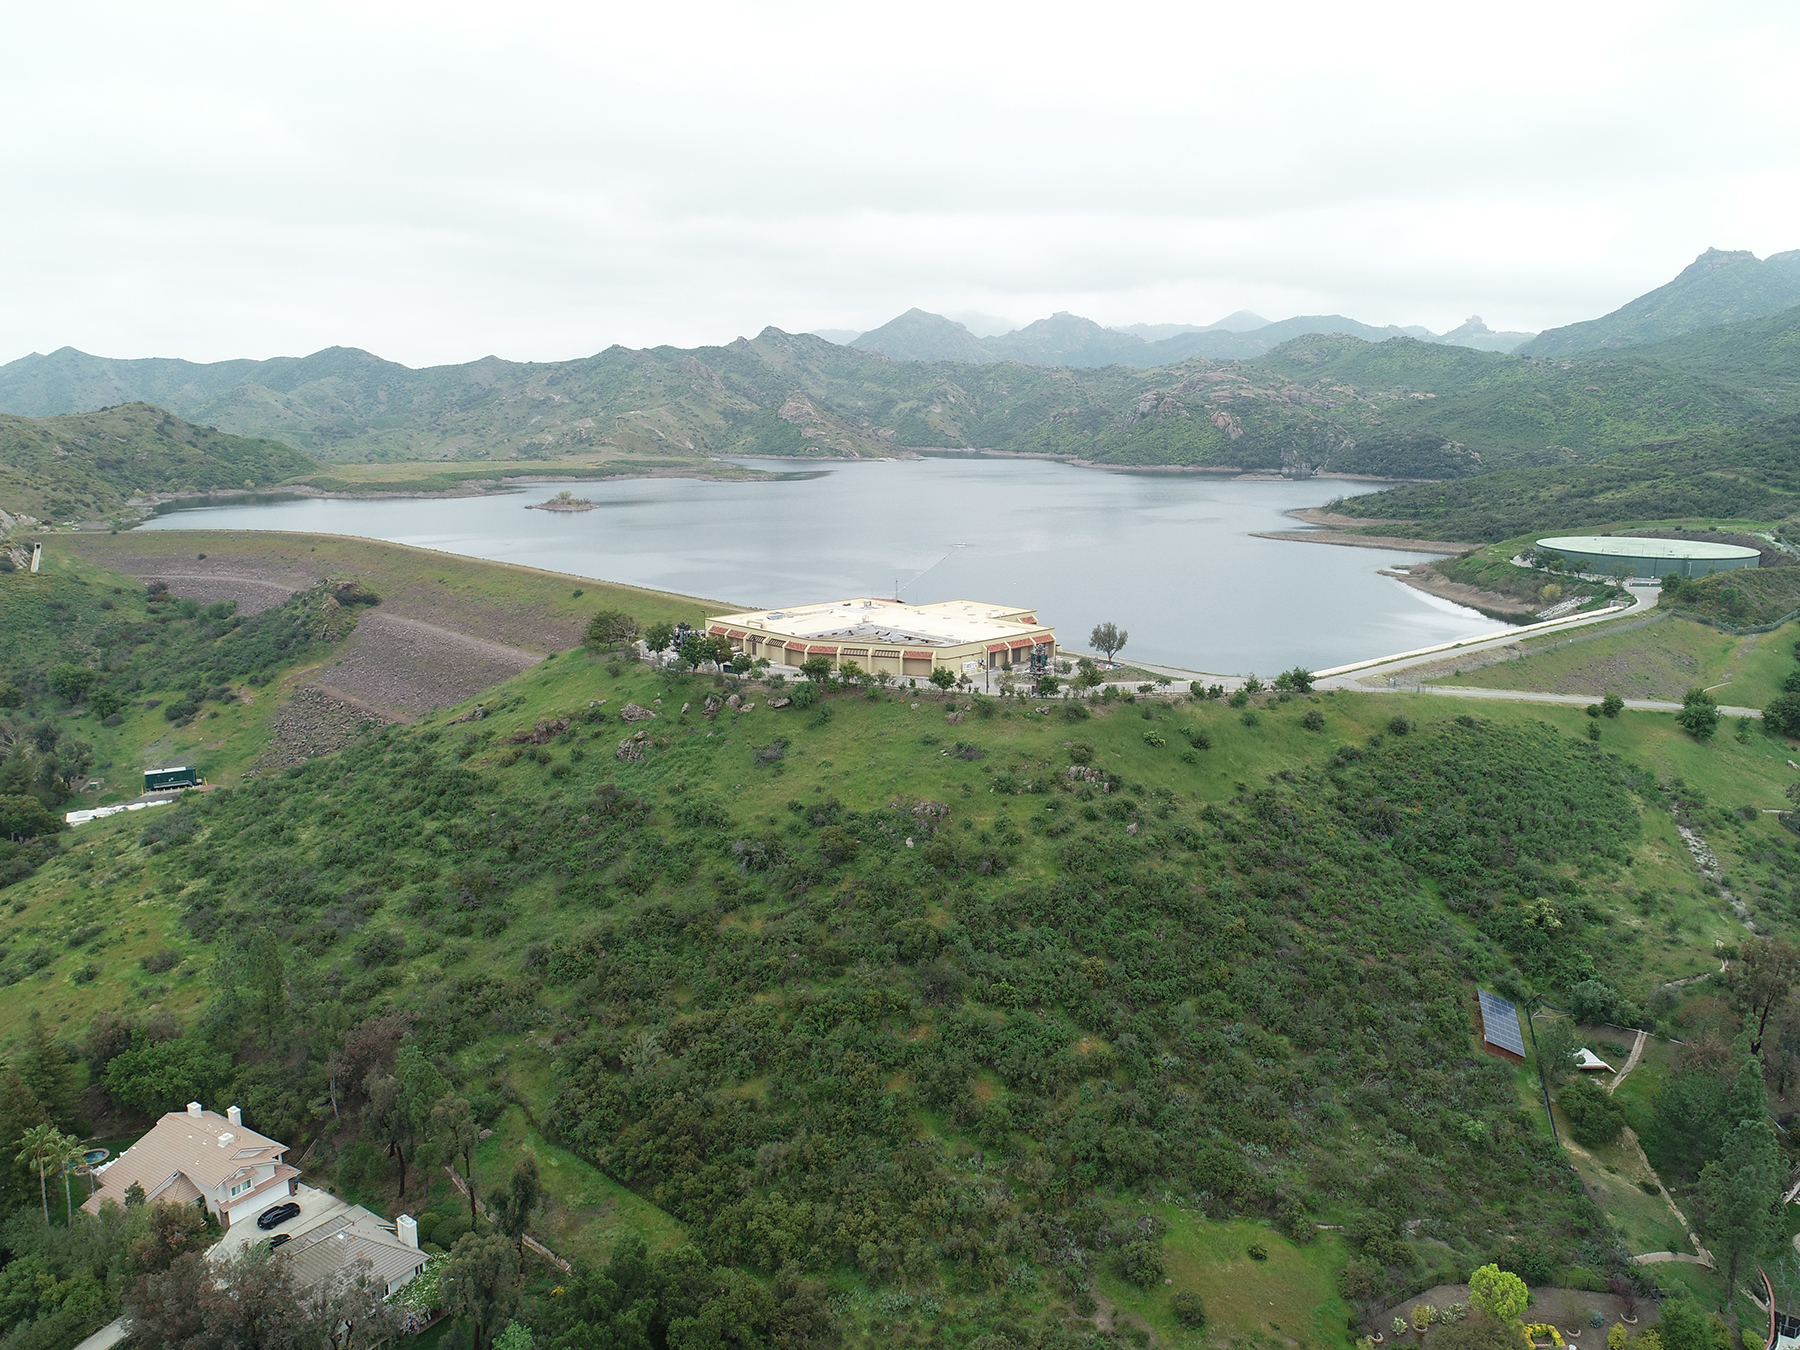 OceanWell plans to test its desalination treatment module in the Las Virgenes Reservoir in Westlake Village, California. (Image courtesy of Las Virgenes Municipal Water District)